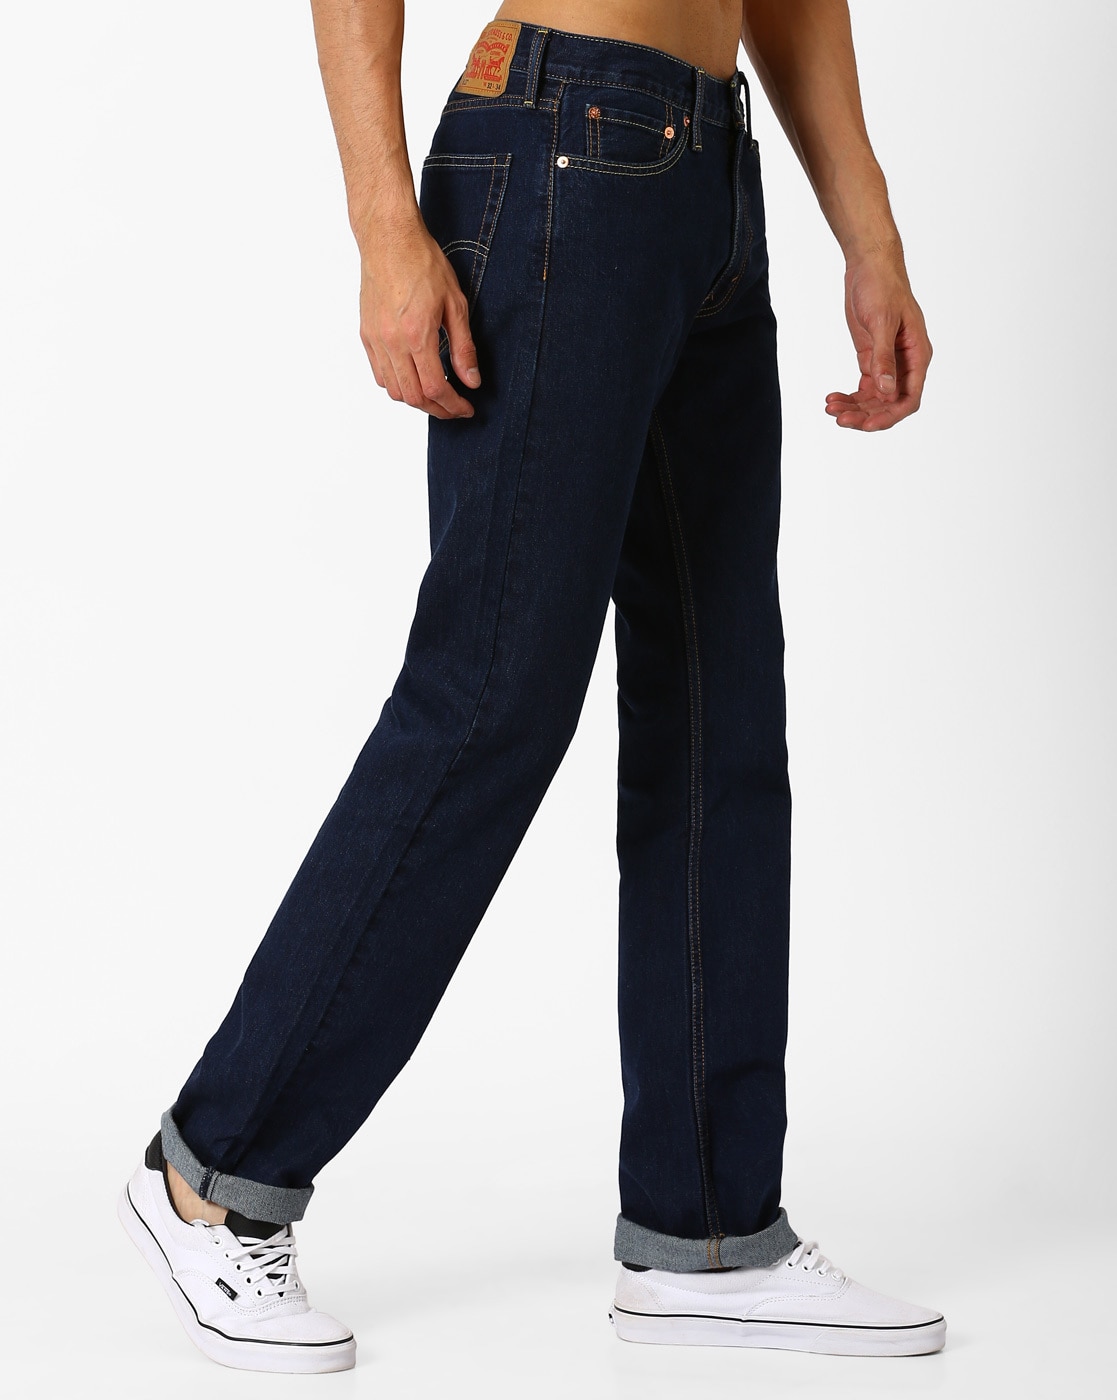 Buy Navy Blue Jeans for Men by LEVIS Online 